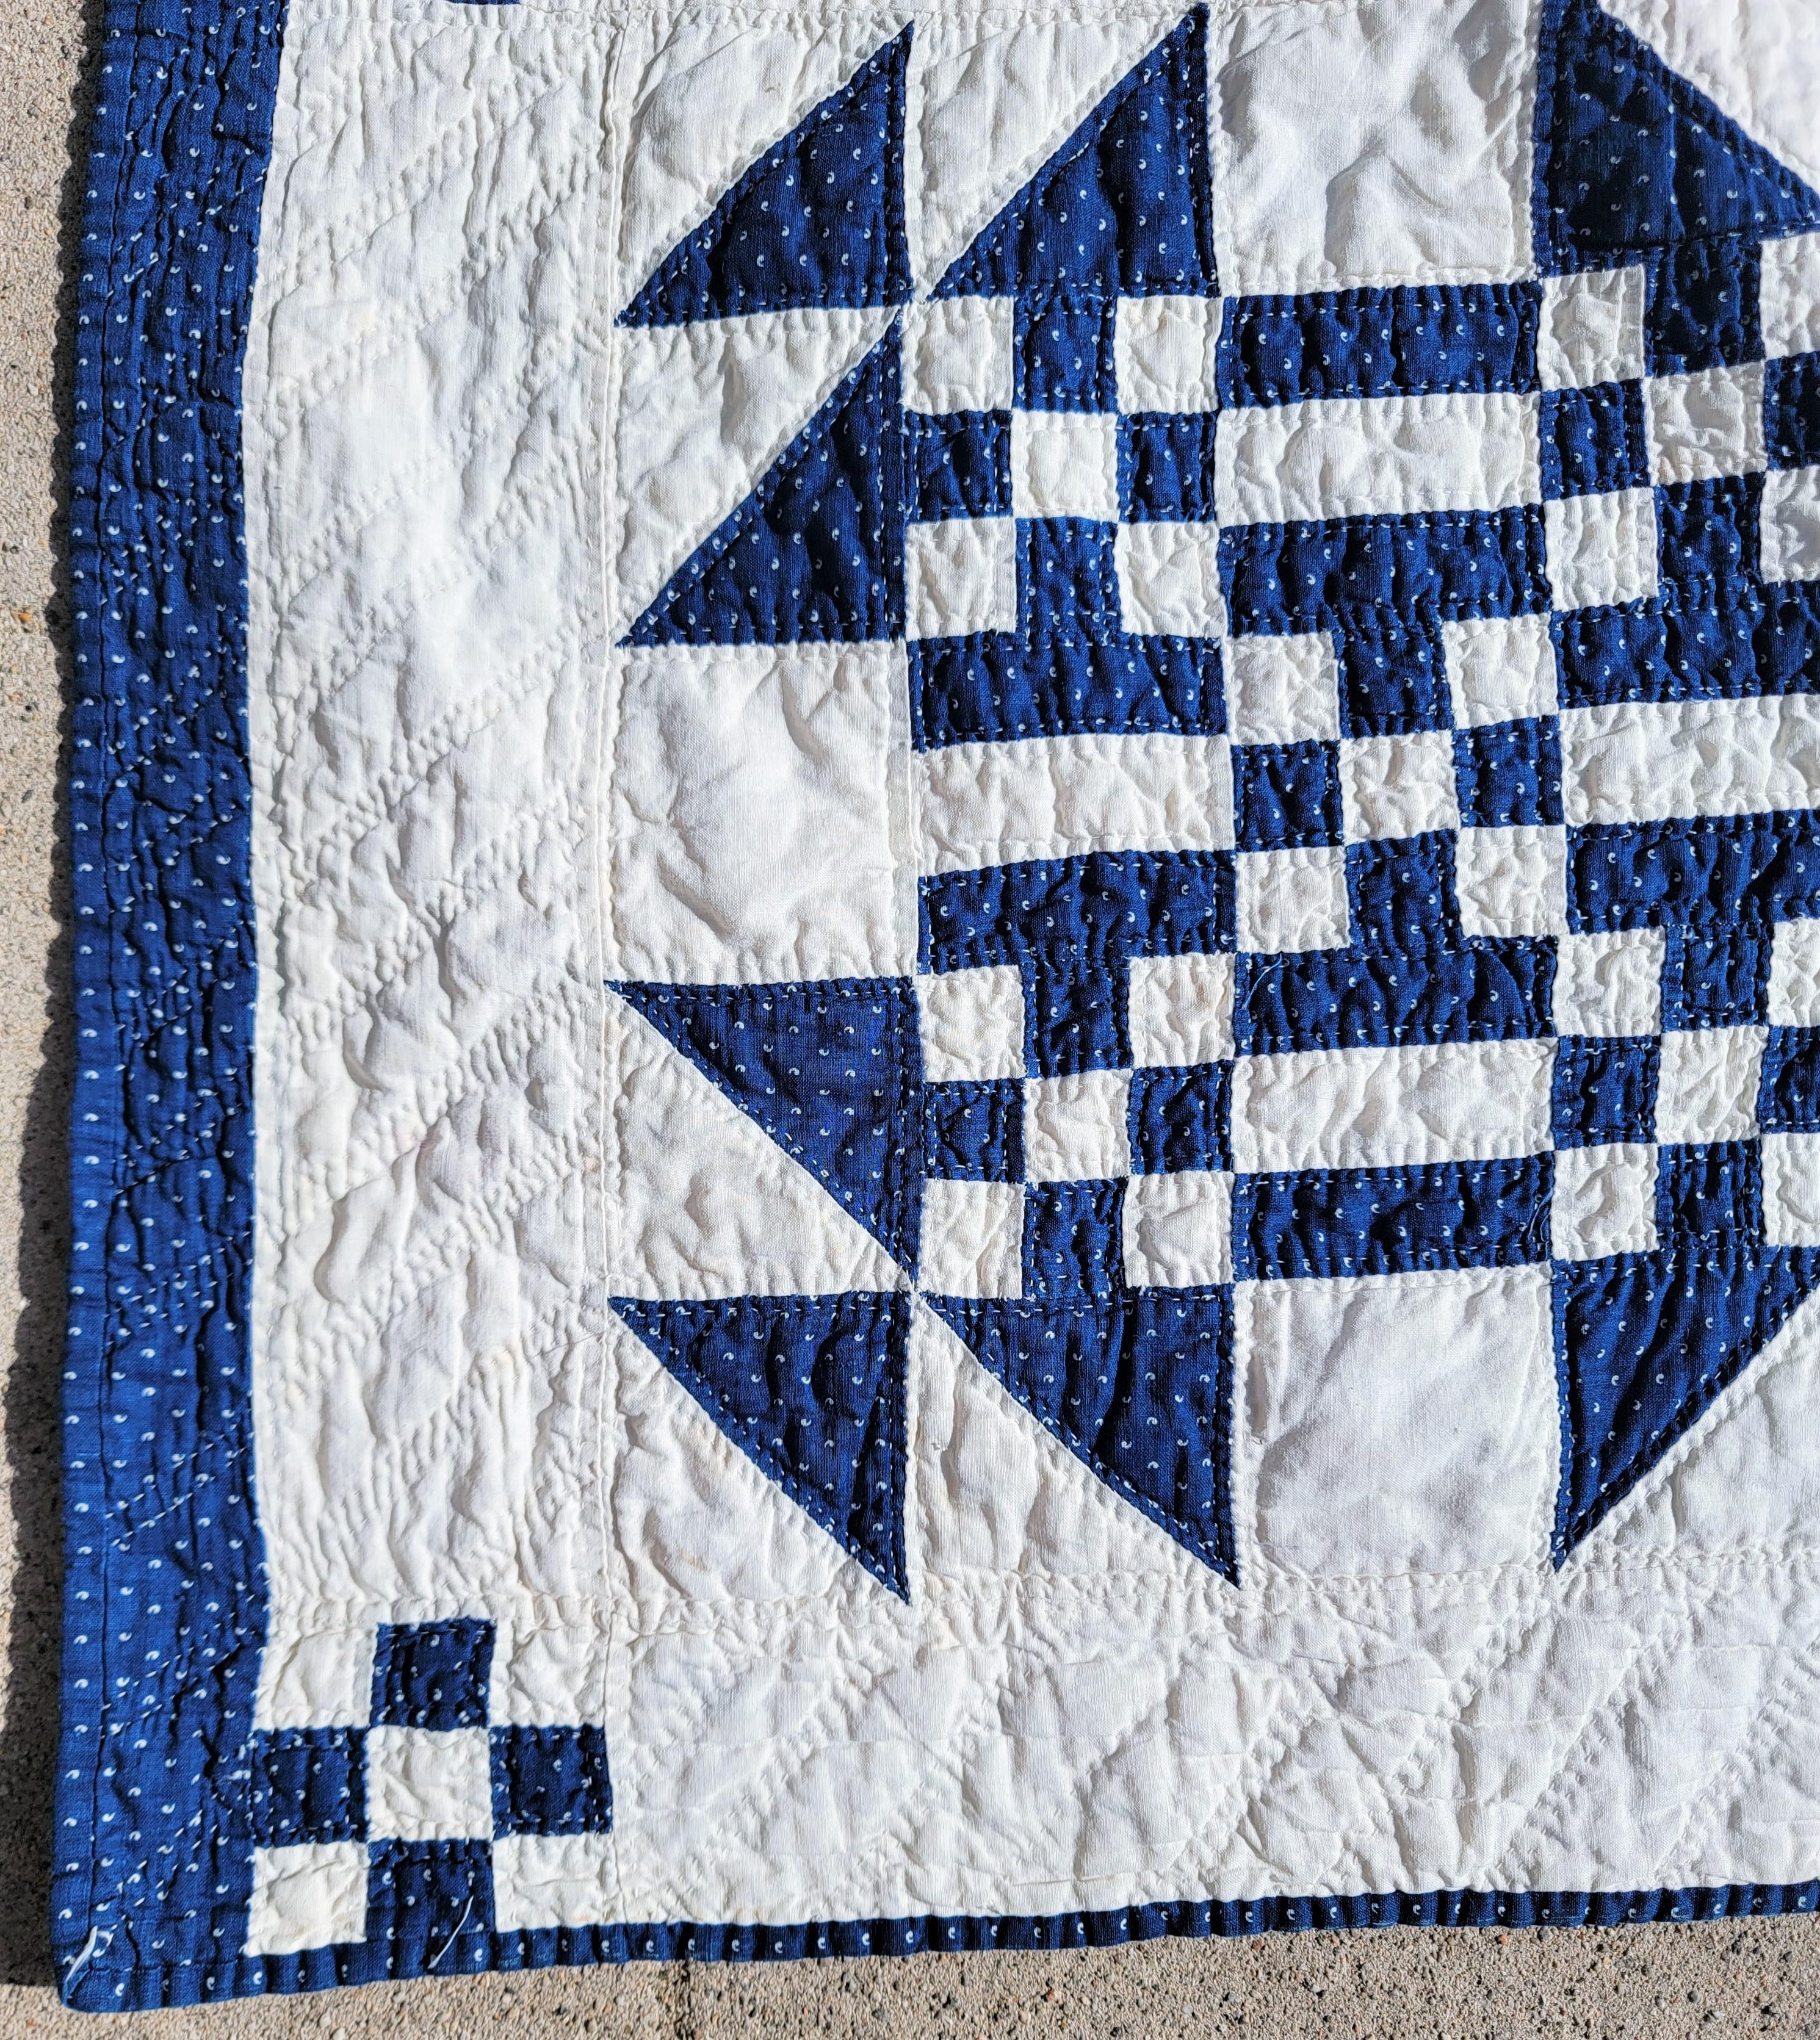 Hand-Crafted 19thc Blue & White Geometric Nine Patch Quilt